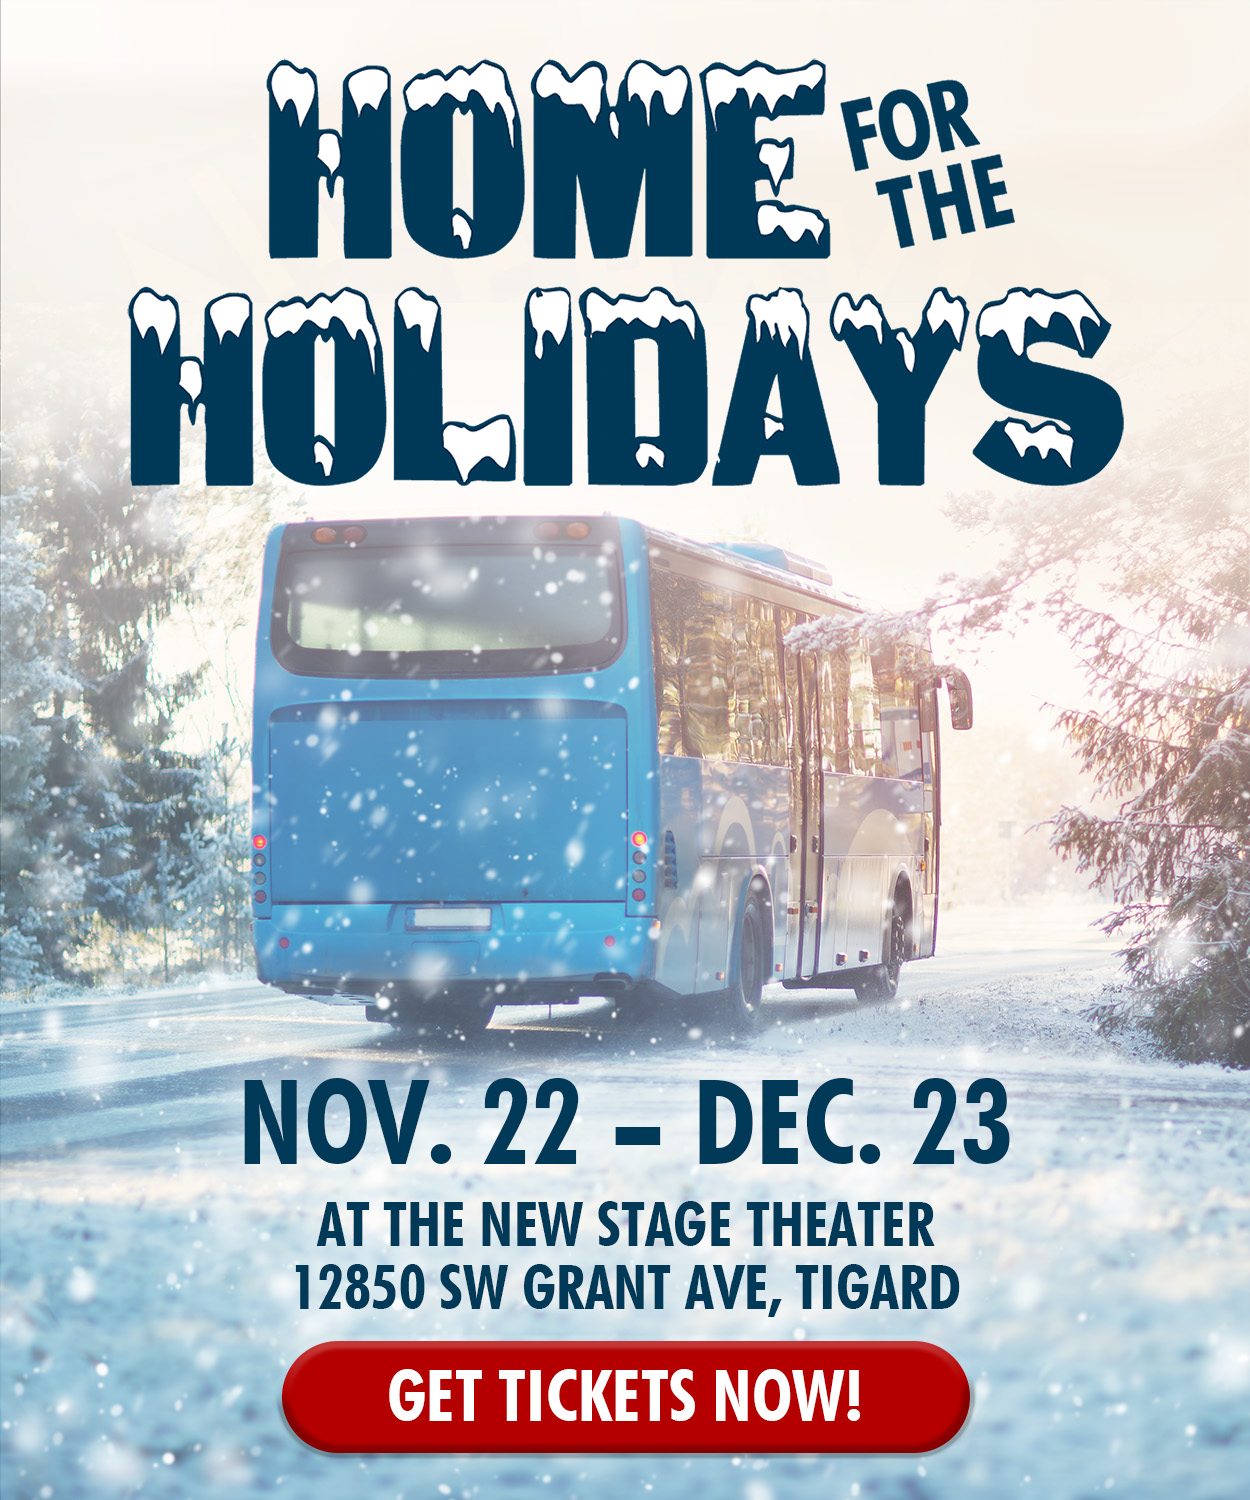 Home for the Holidays. November 22 to December 23. Get tickets by clicking here.